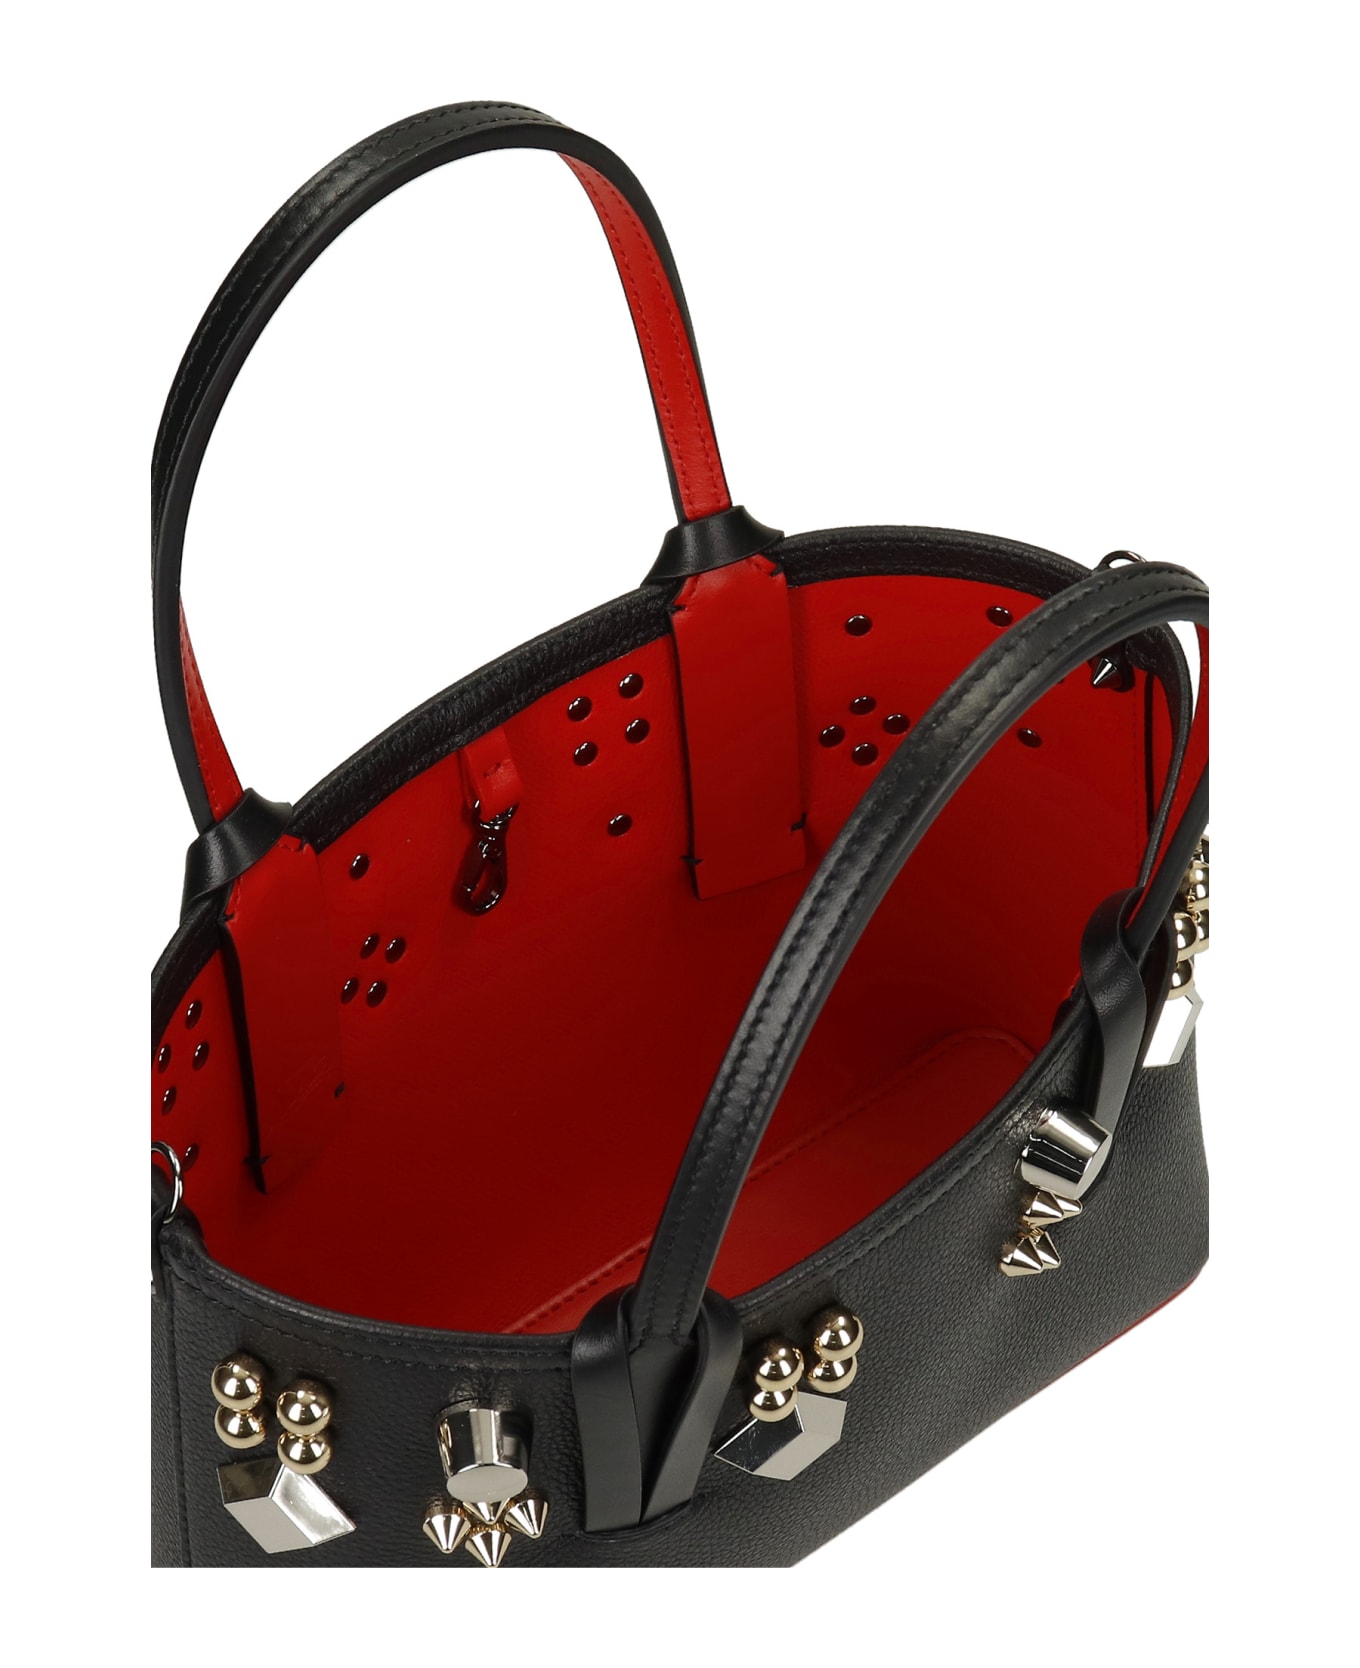 Christian Louboutin Tote In Black Leather - black